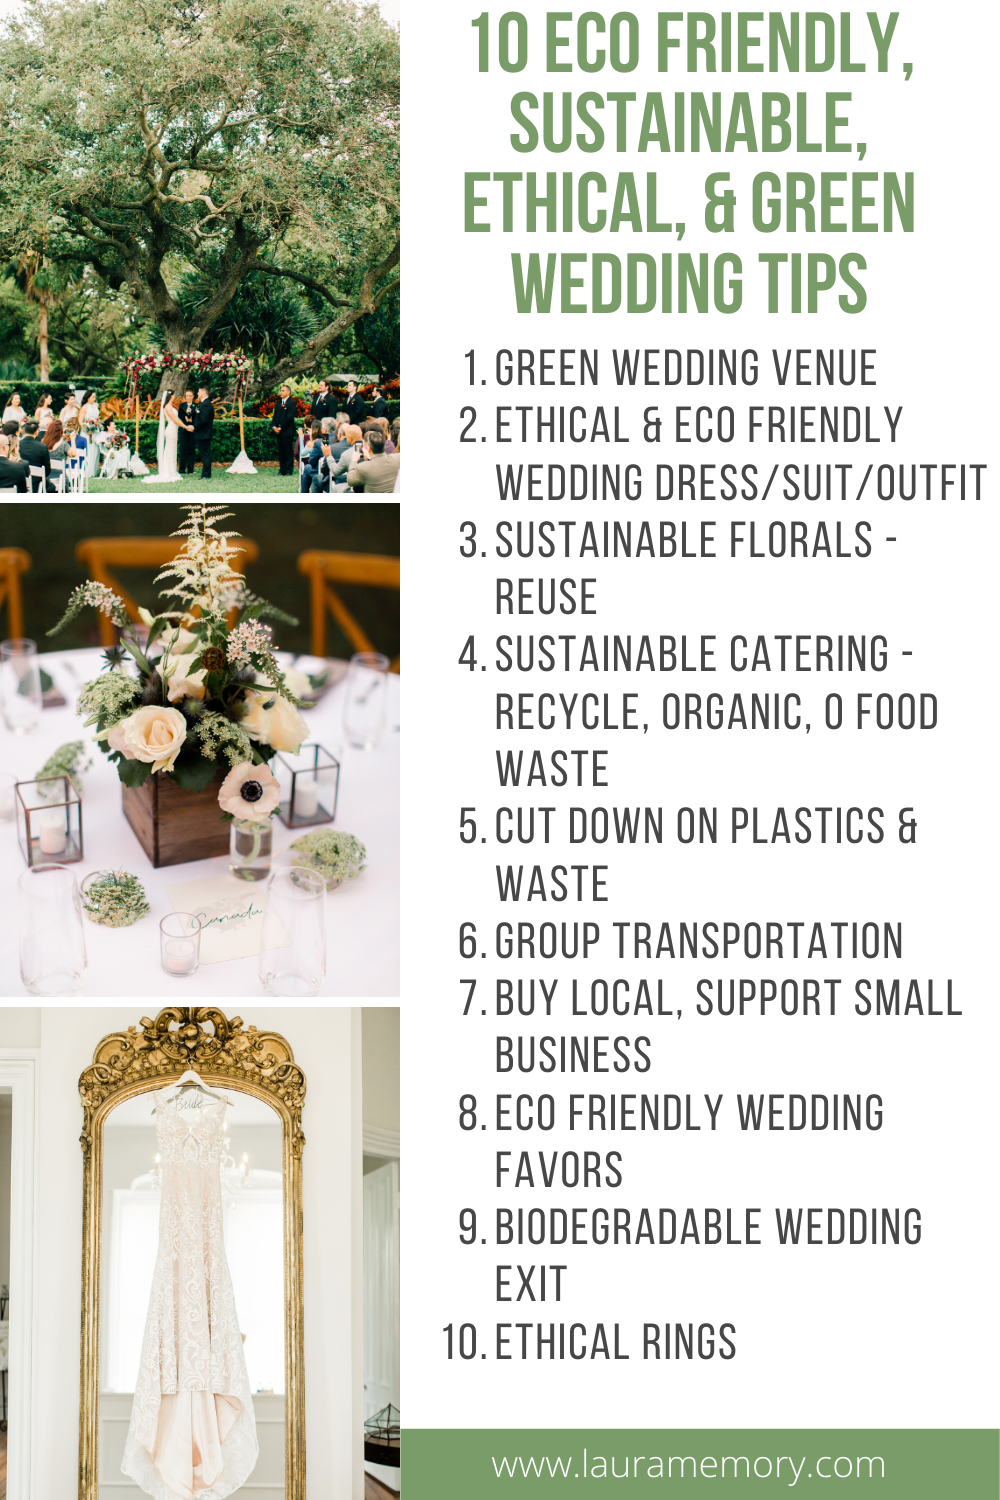 10 Tips To Make Your Wedding Day Eco Friendly | How to Have a Sustainable Wedding | Green Wedding Tips